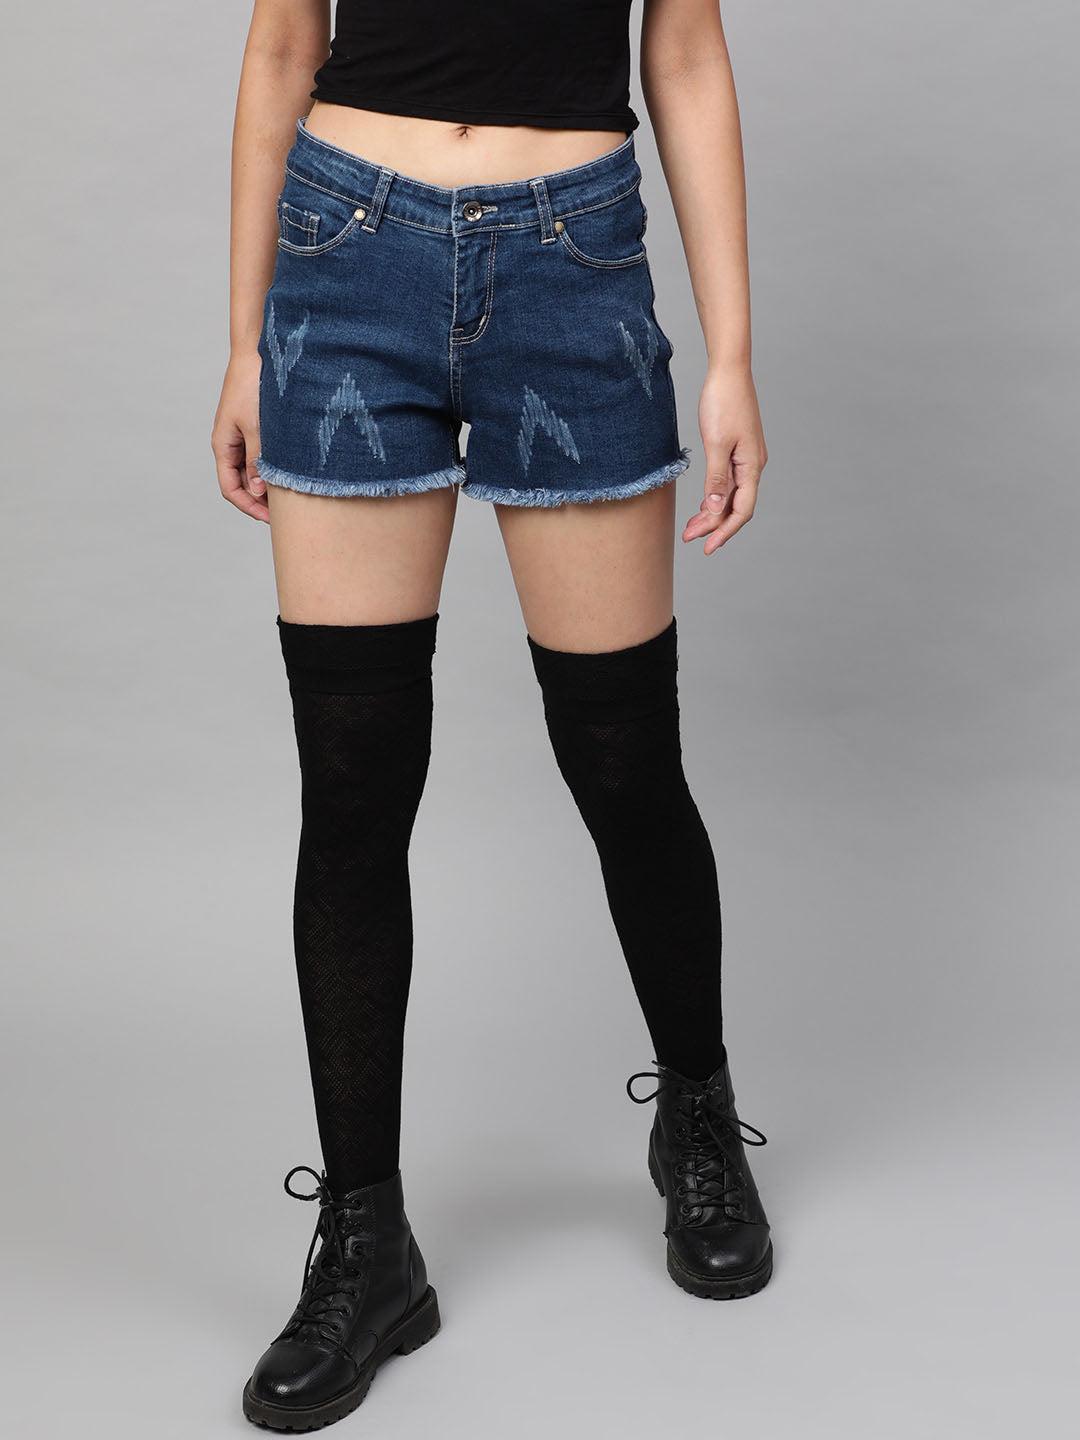 Hot Pants Shorts - Buy Hot Pants Shorts online at Best Prices in India |  Flipkart.com